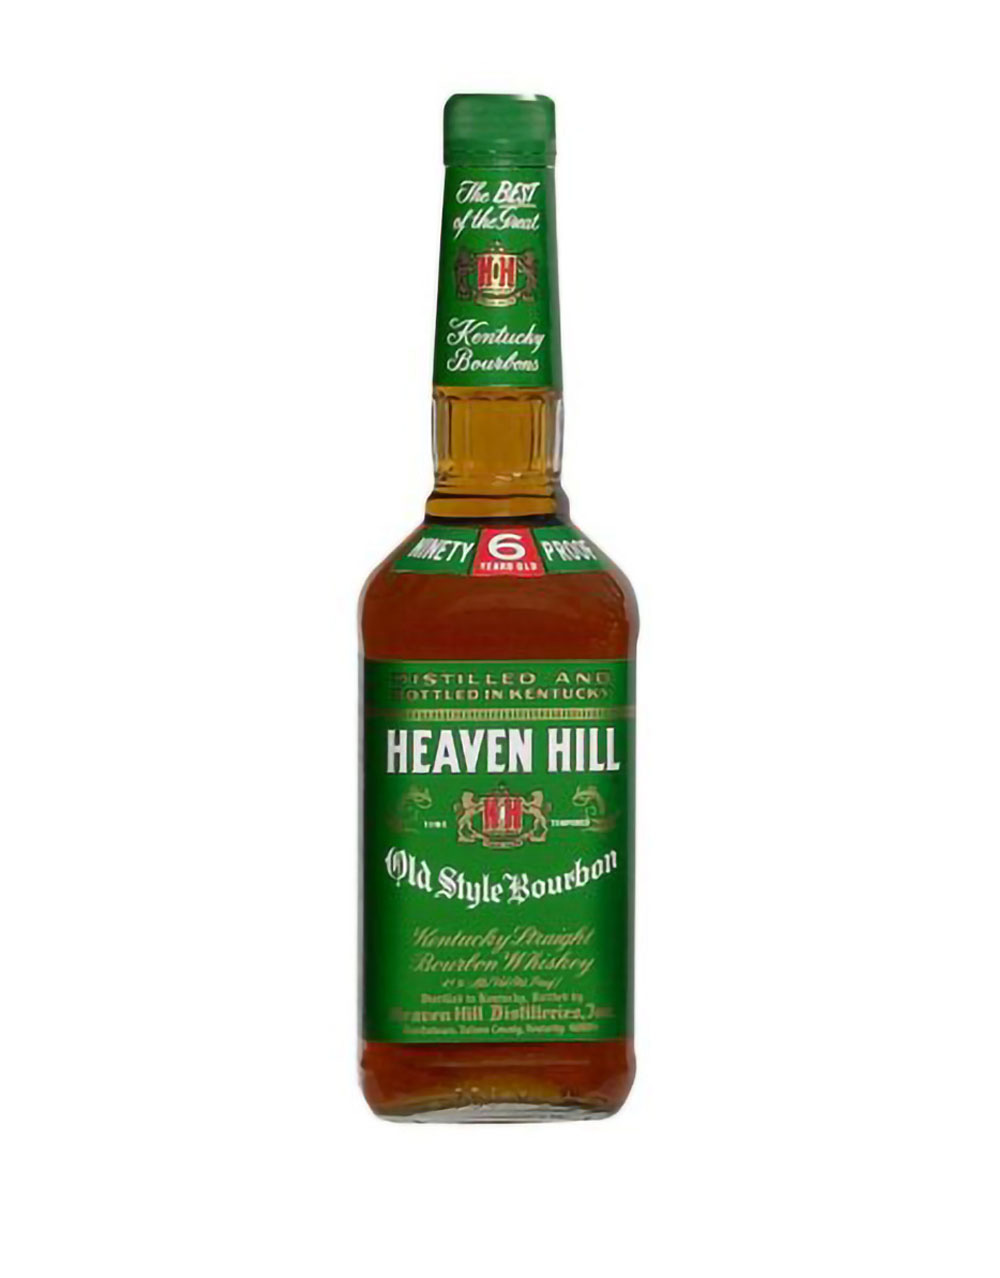 Heaven Hill 6 Year Old Green Label Kentucky Straight Bourbon Whiskey